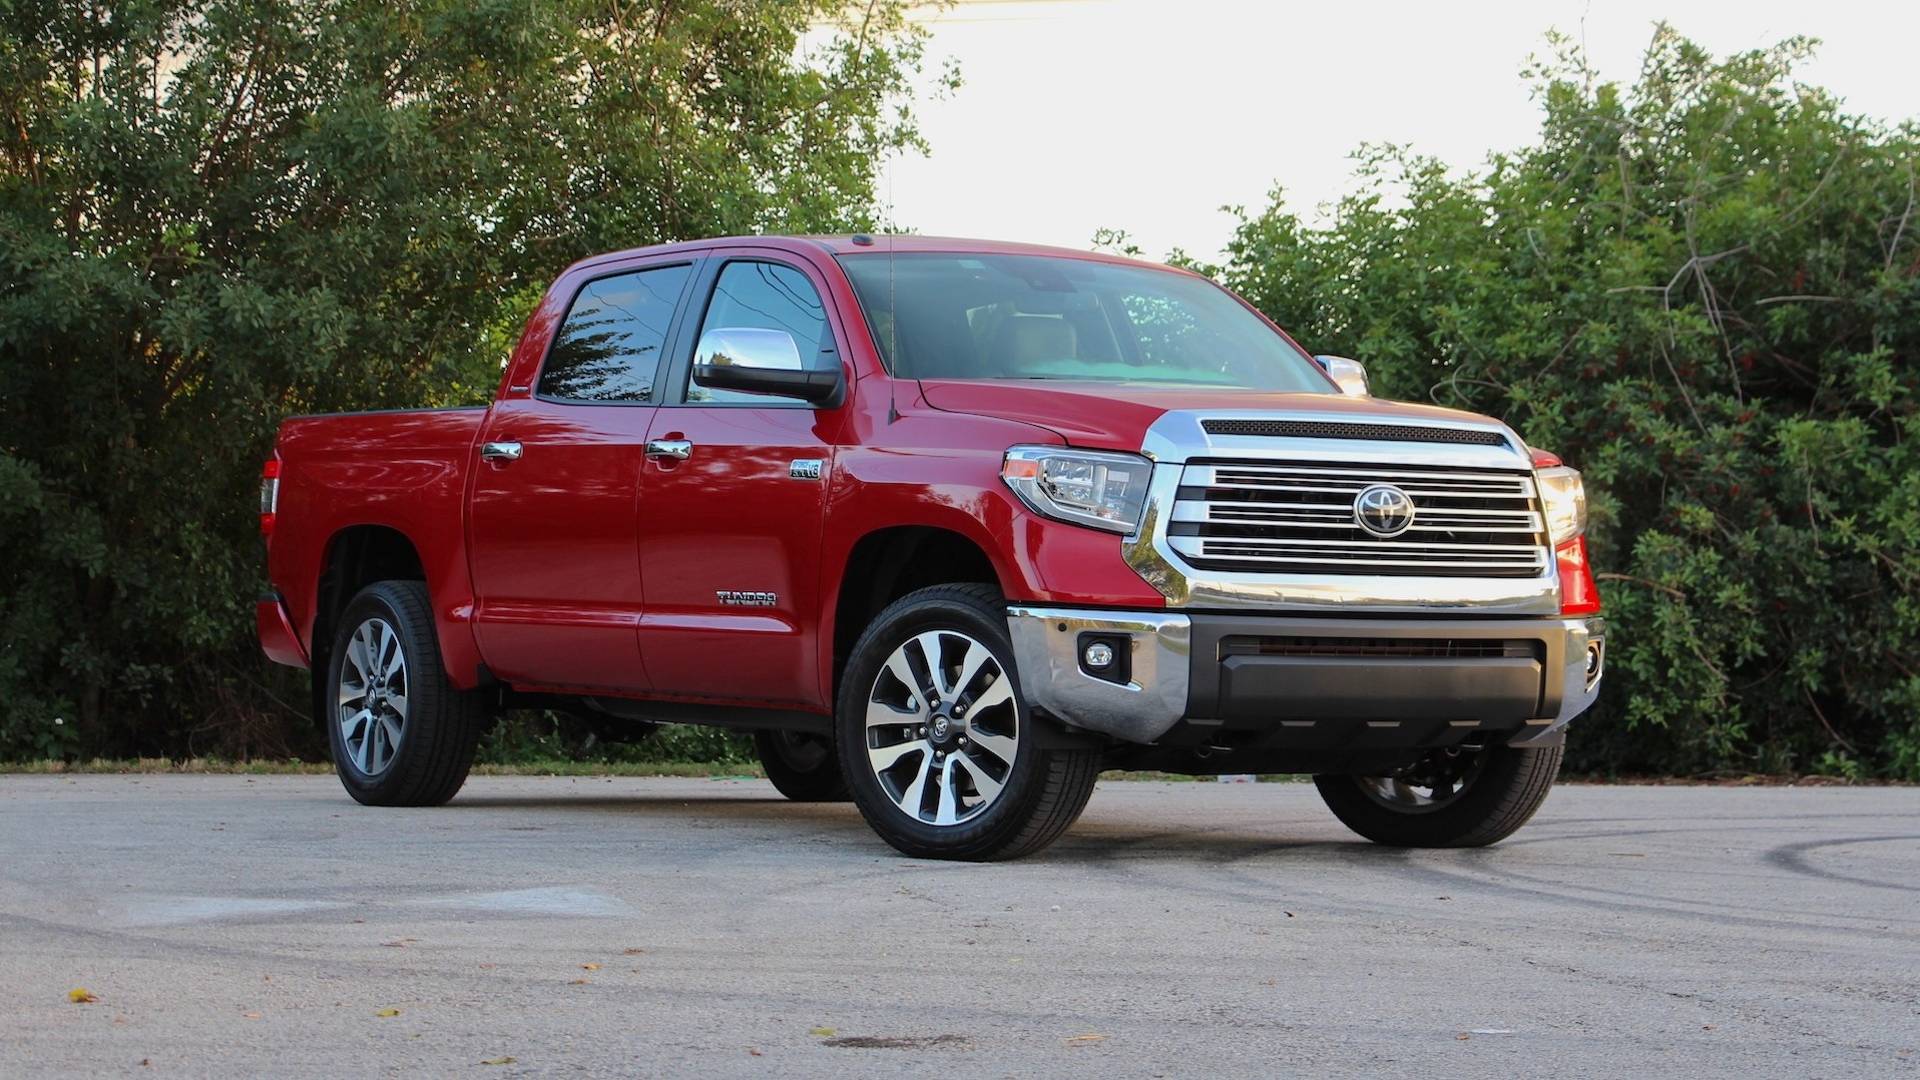 2018 Toyota Tundra Review: Oldie But Goodie